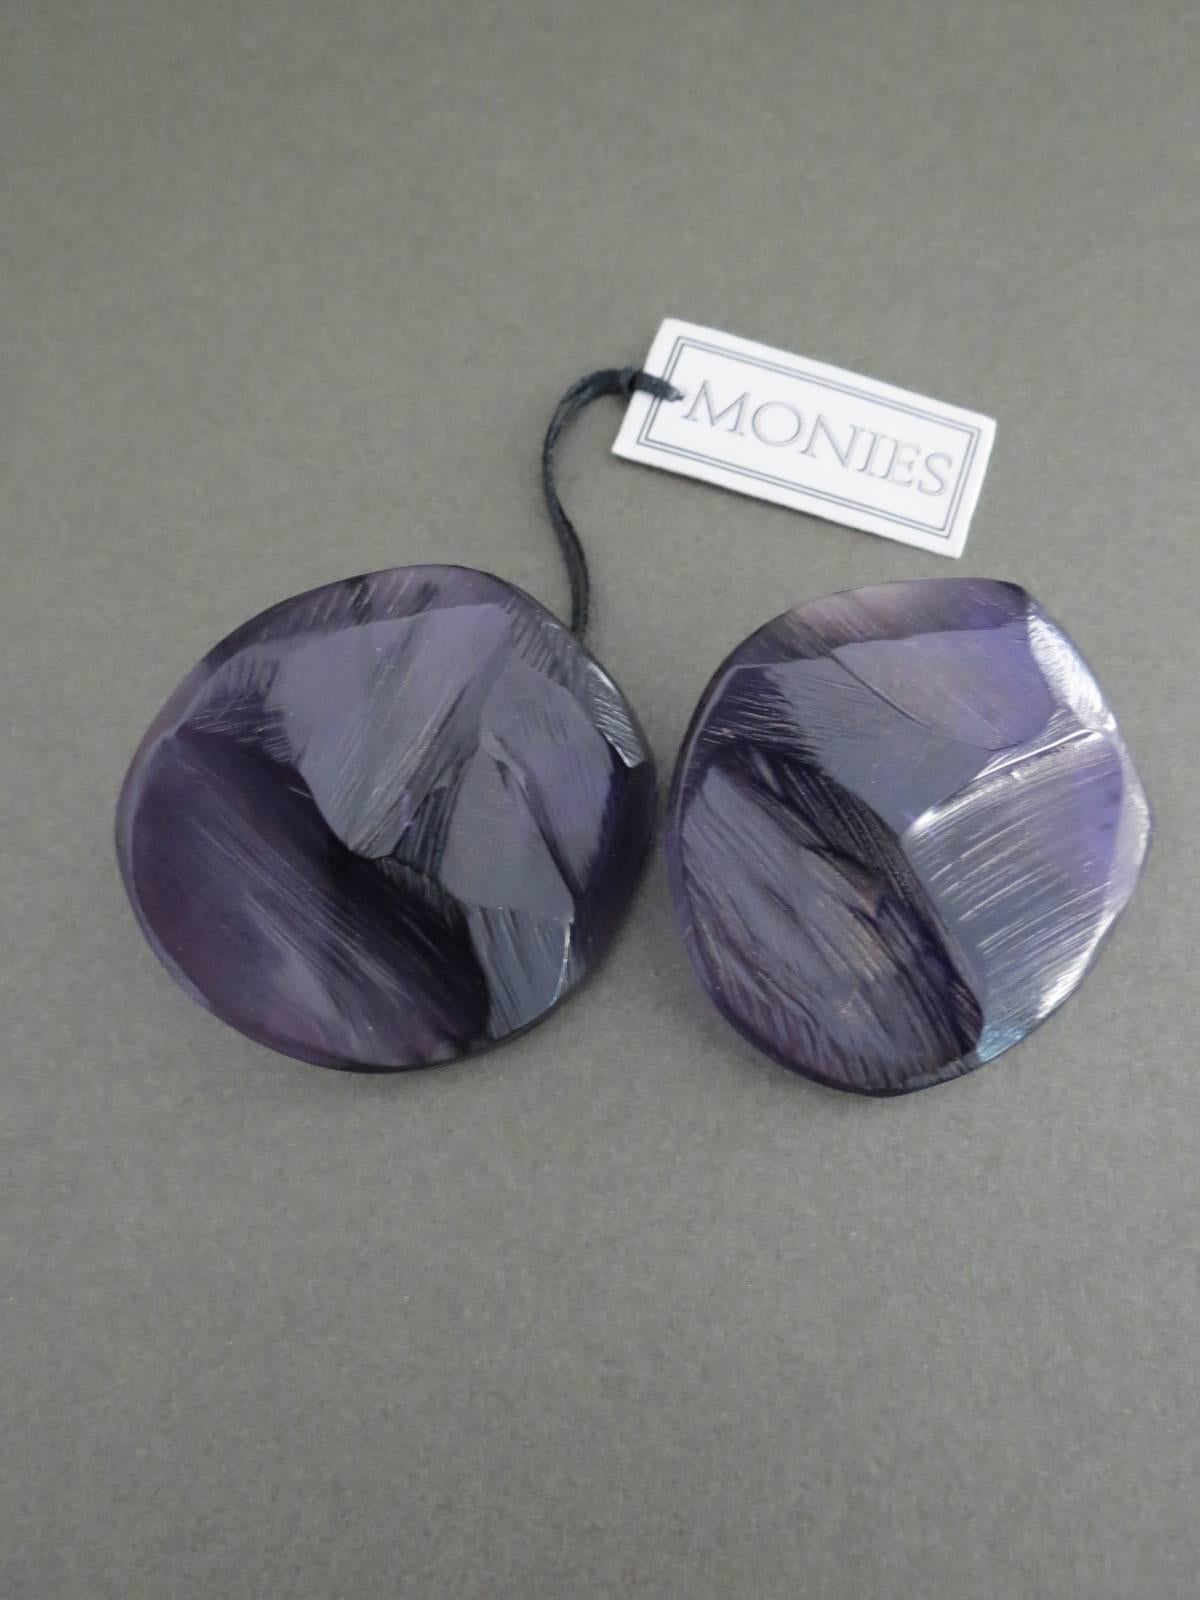 This Monies vintage set of lucite earrings would be lovely addition to your collection. The earrings are not signed but have still original label.
Item Specifics
Height: 5.3cm (approx 2.00